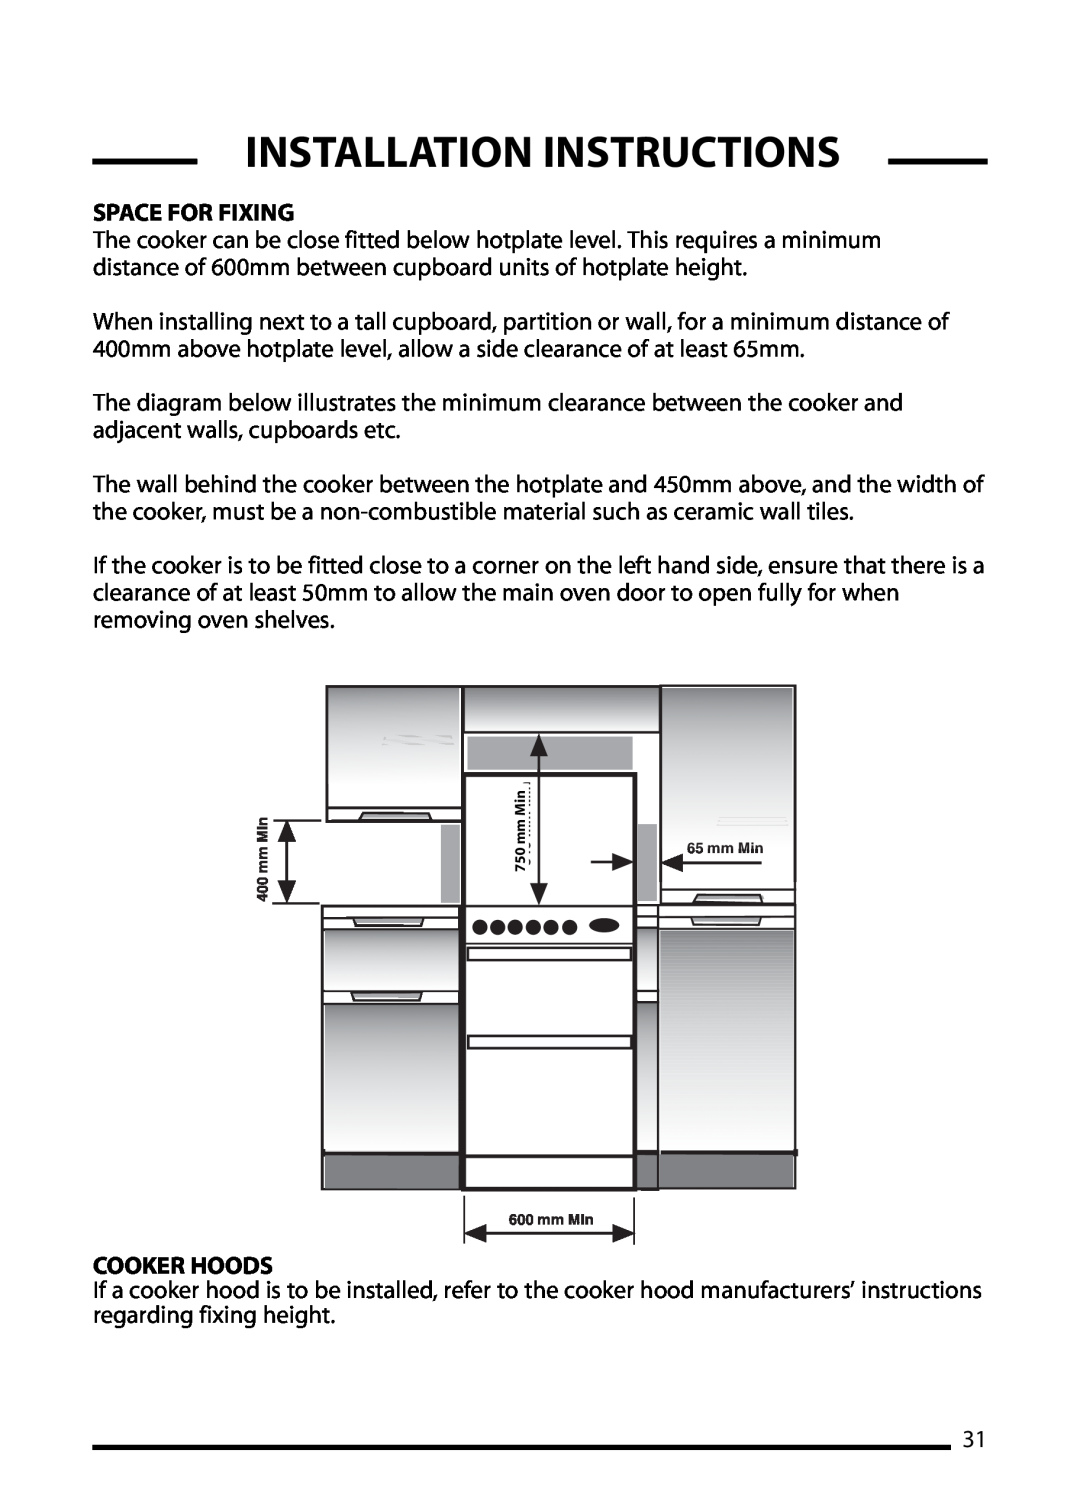 Cannon 10410G, ICON 600 installation instructions Space For Fixing, Cooker Hoods, Installation Instructions 